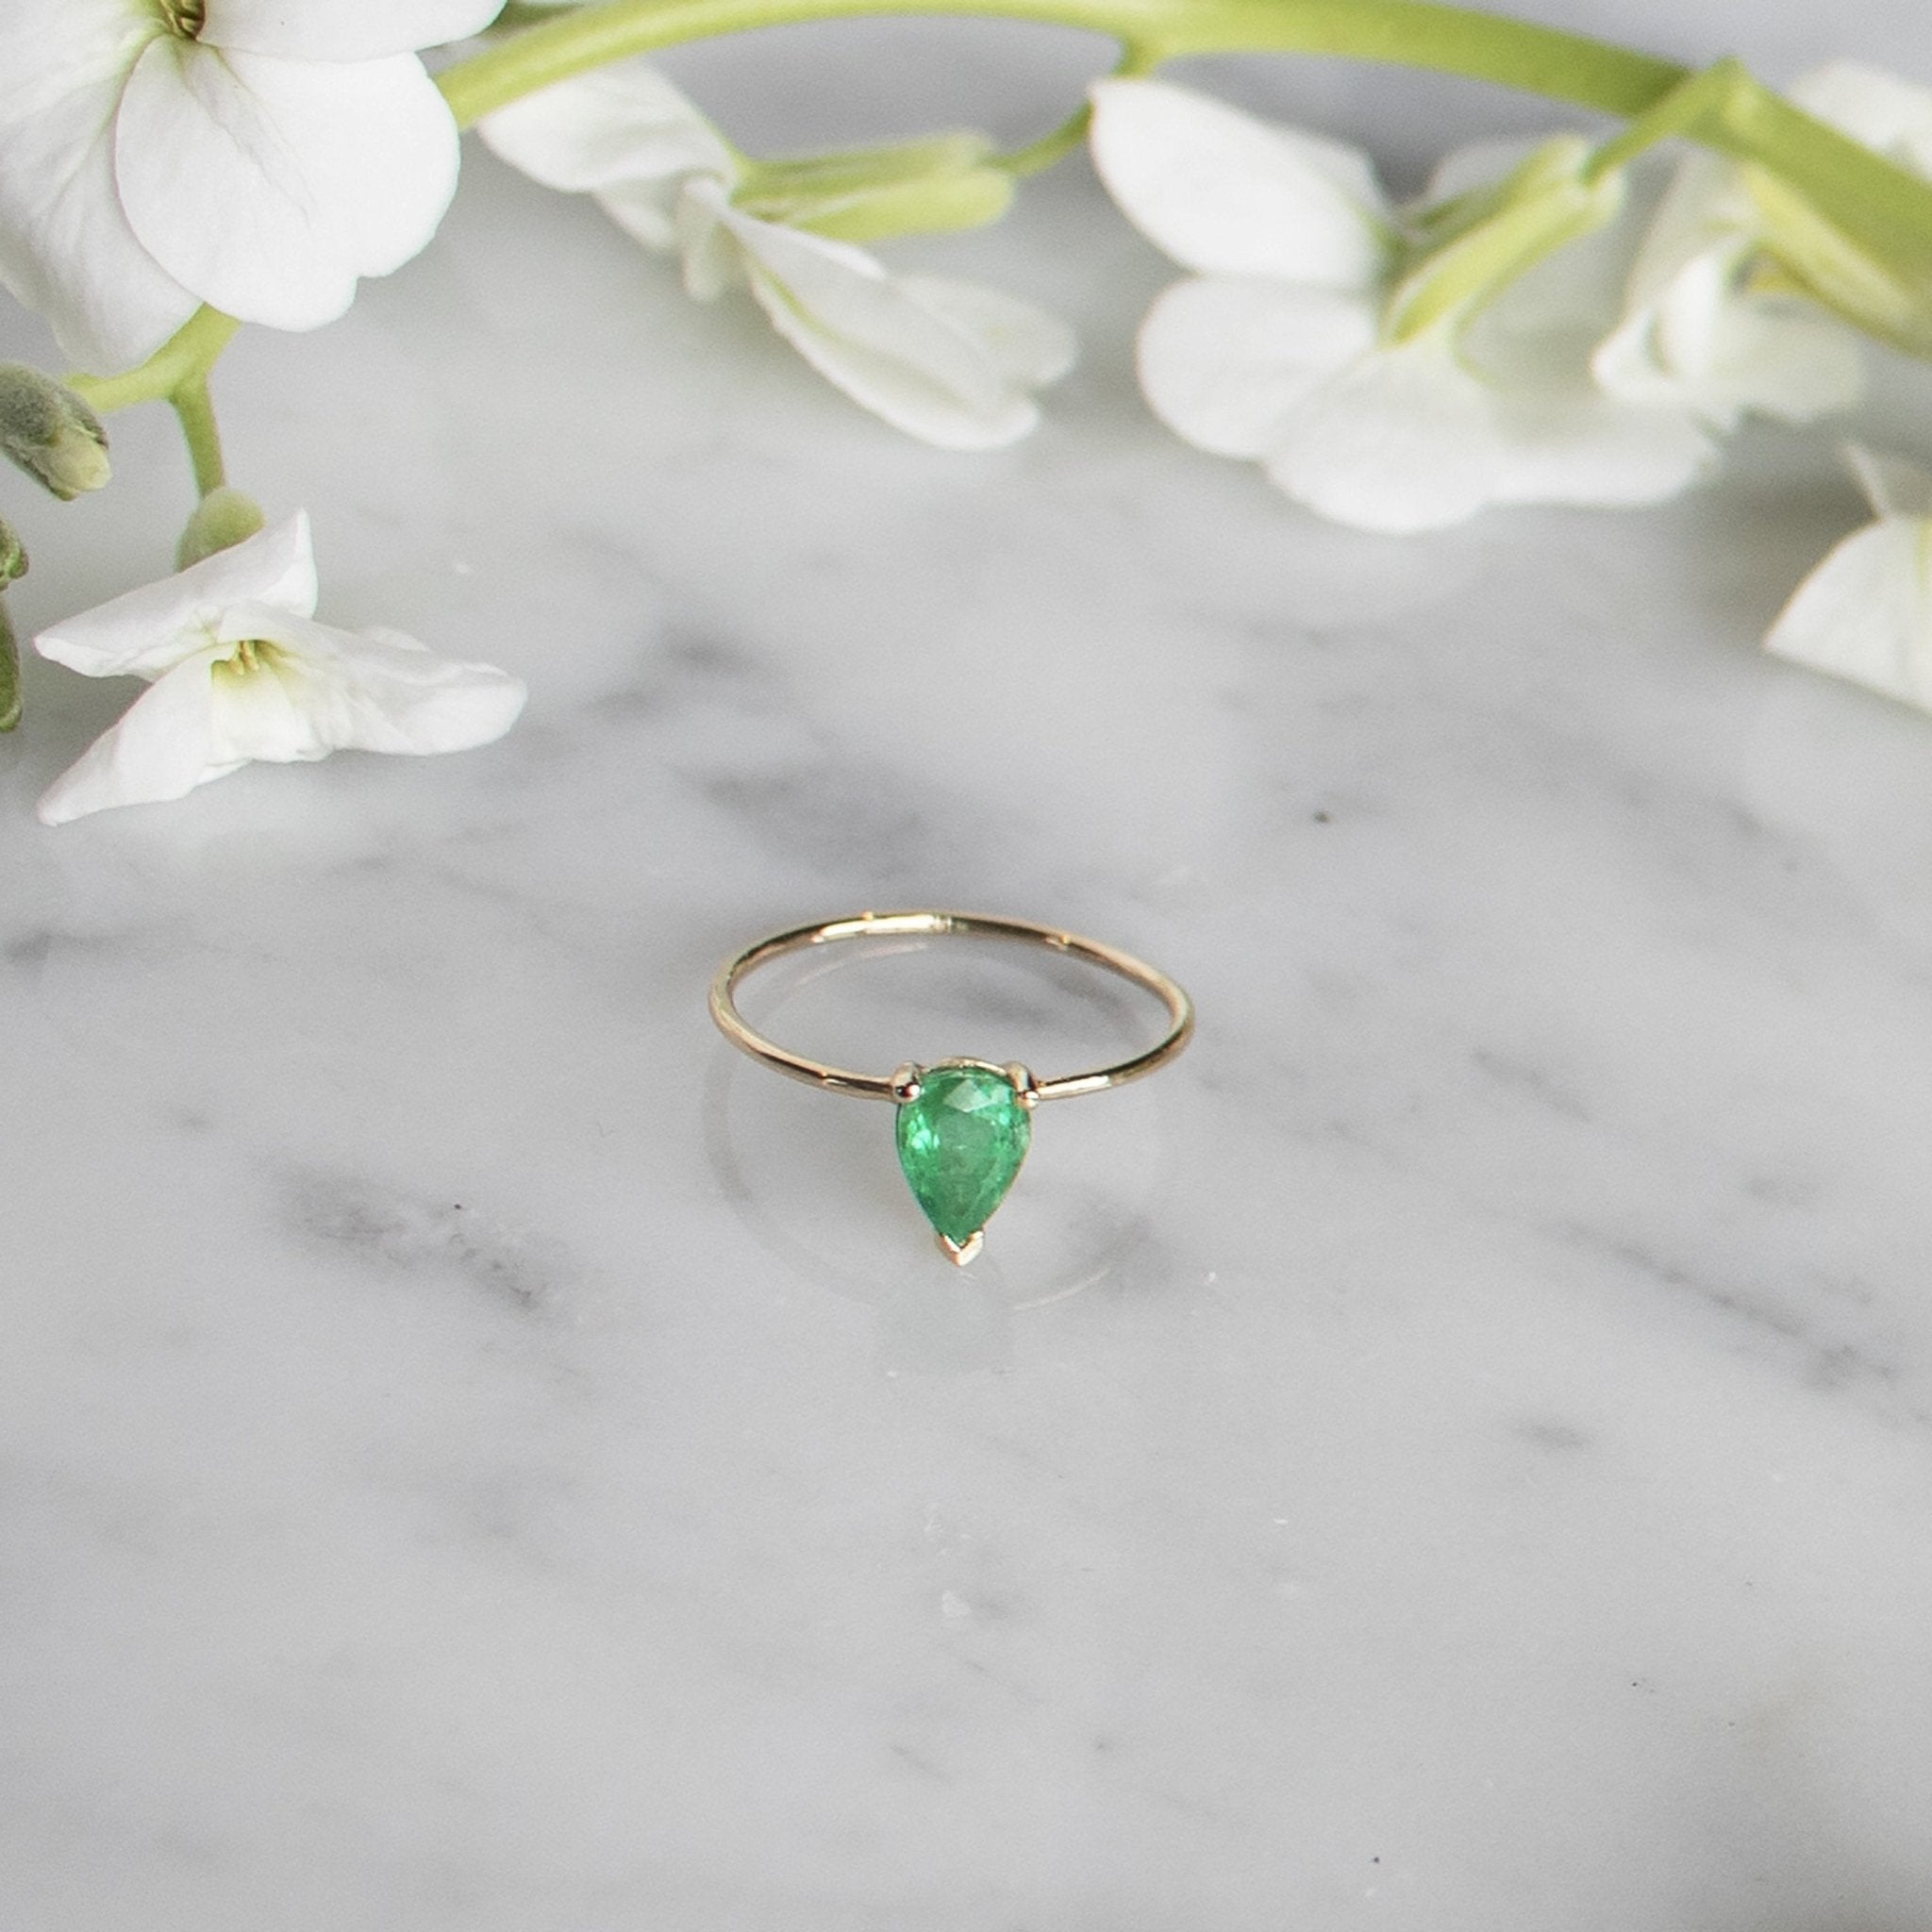 Venus - 14K Gold Pear Shaped Emerald Ring - Camille Jewelry